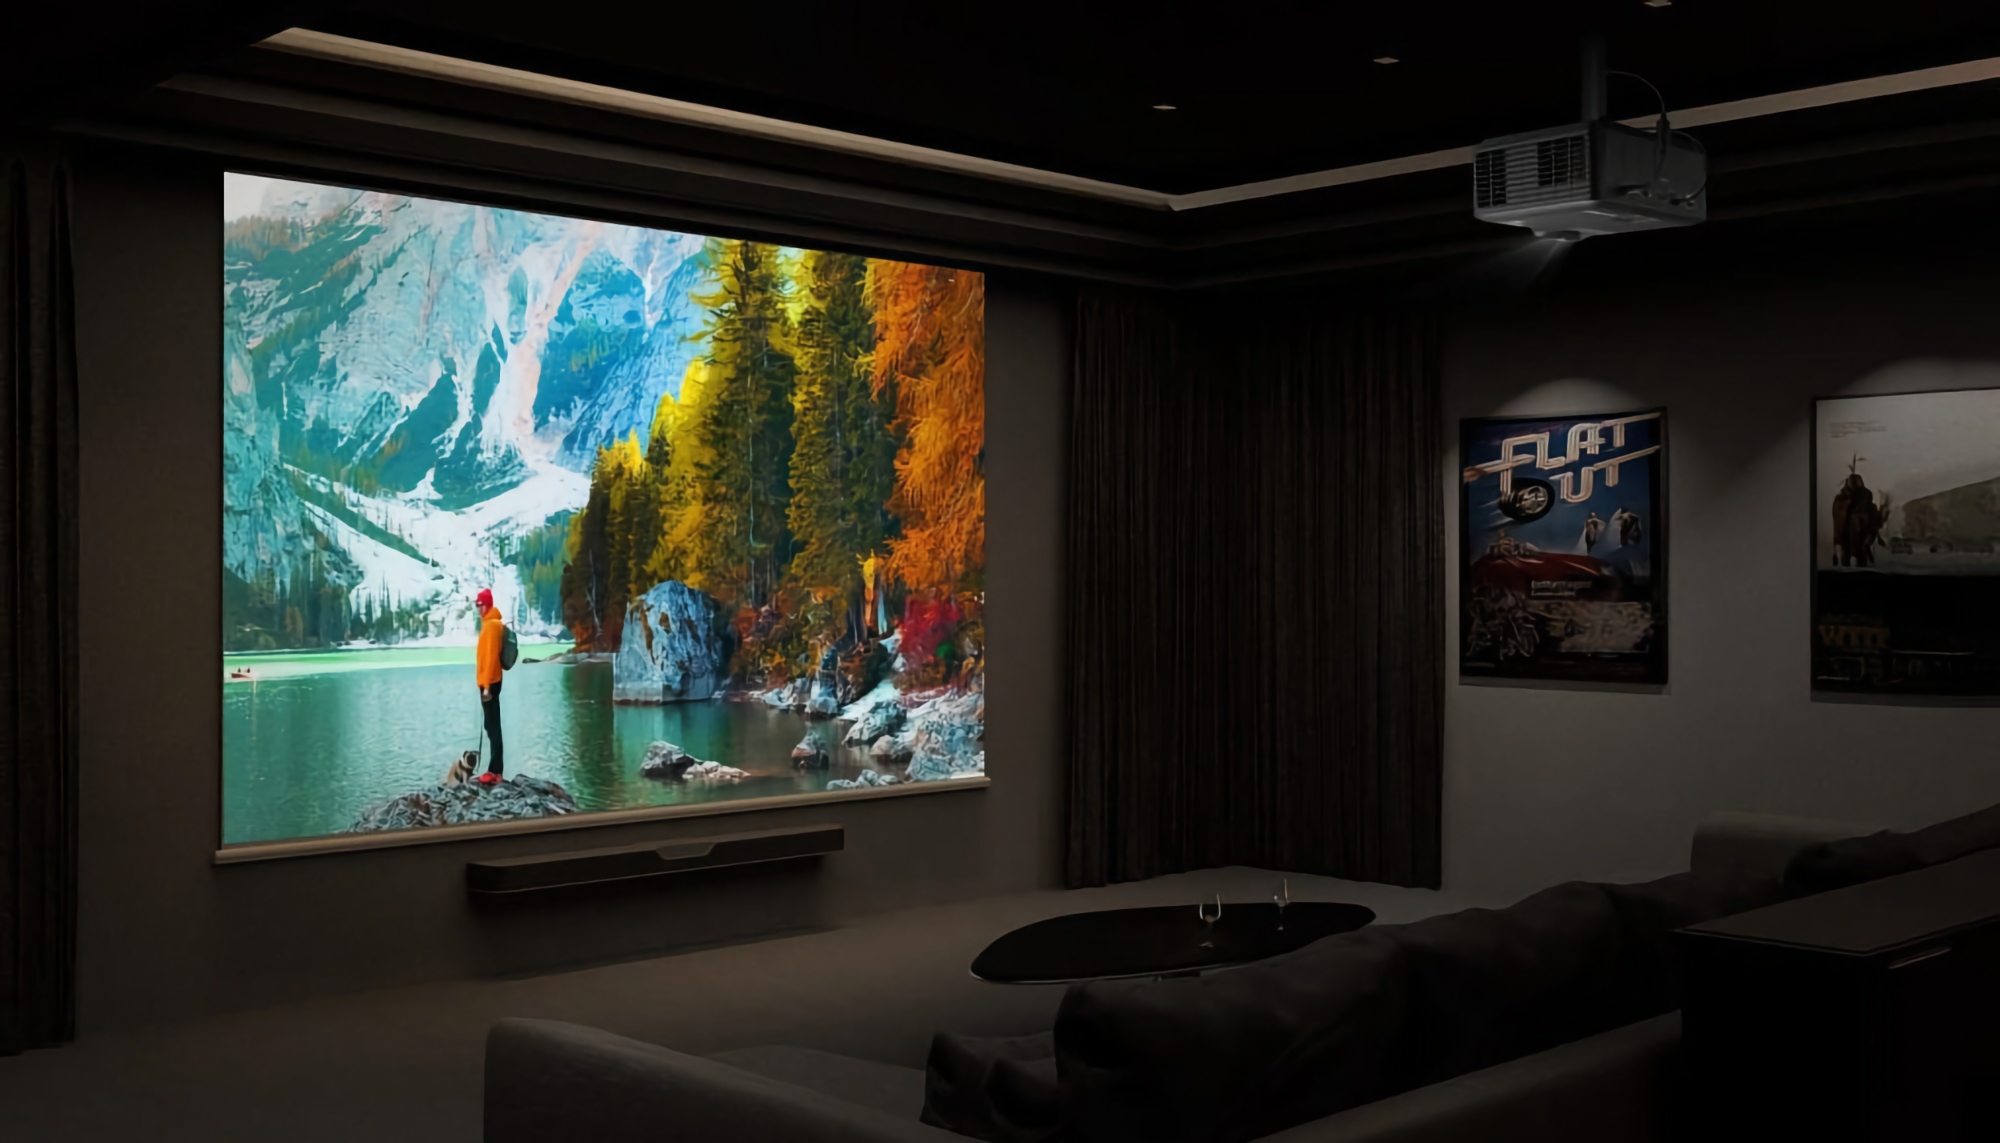 ViewSonic LX700-4K RGB: a projector that can reproduce a picture up to 300 inches in size and a refresh rate of up to 240Hz